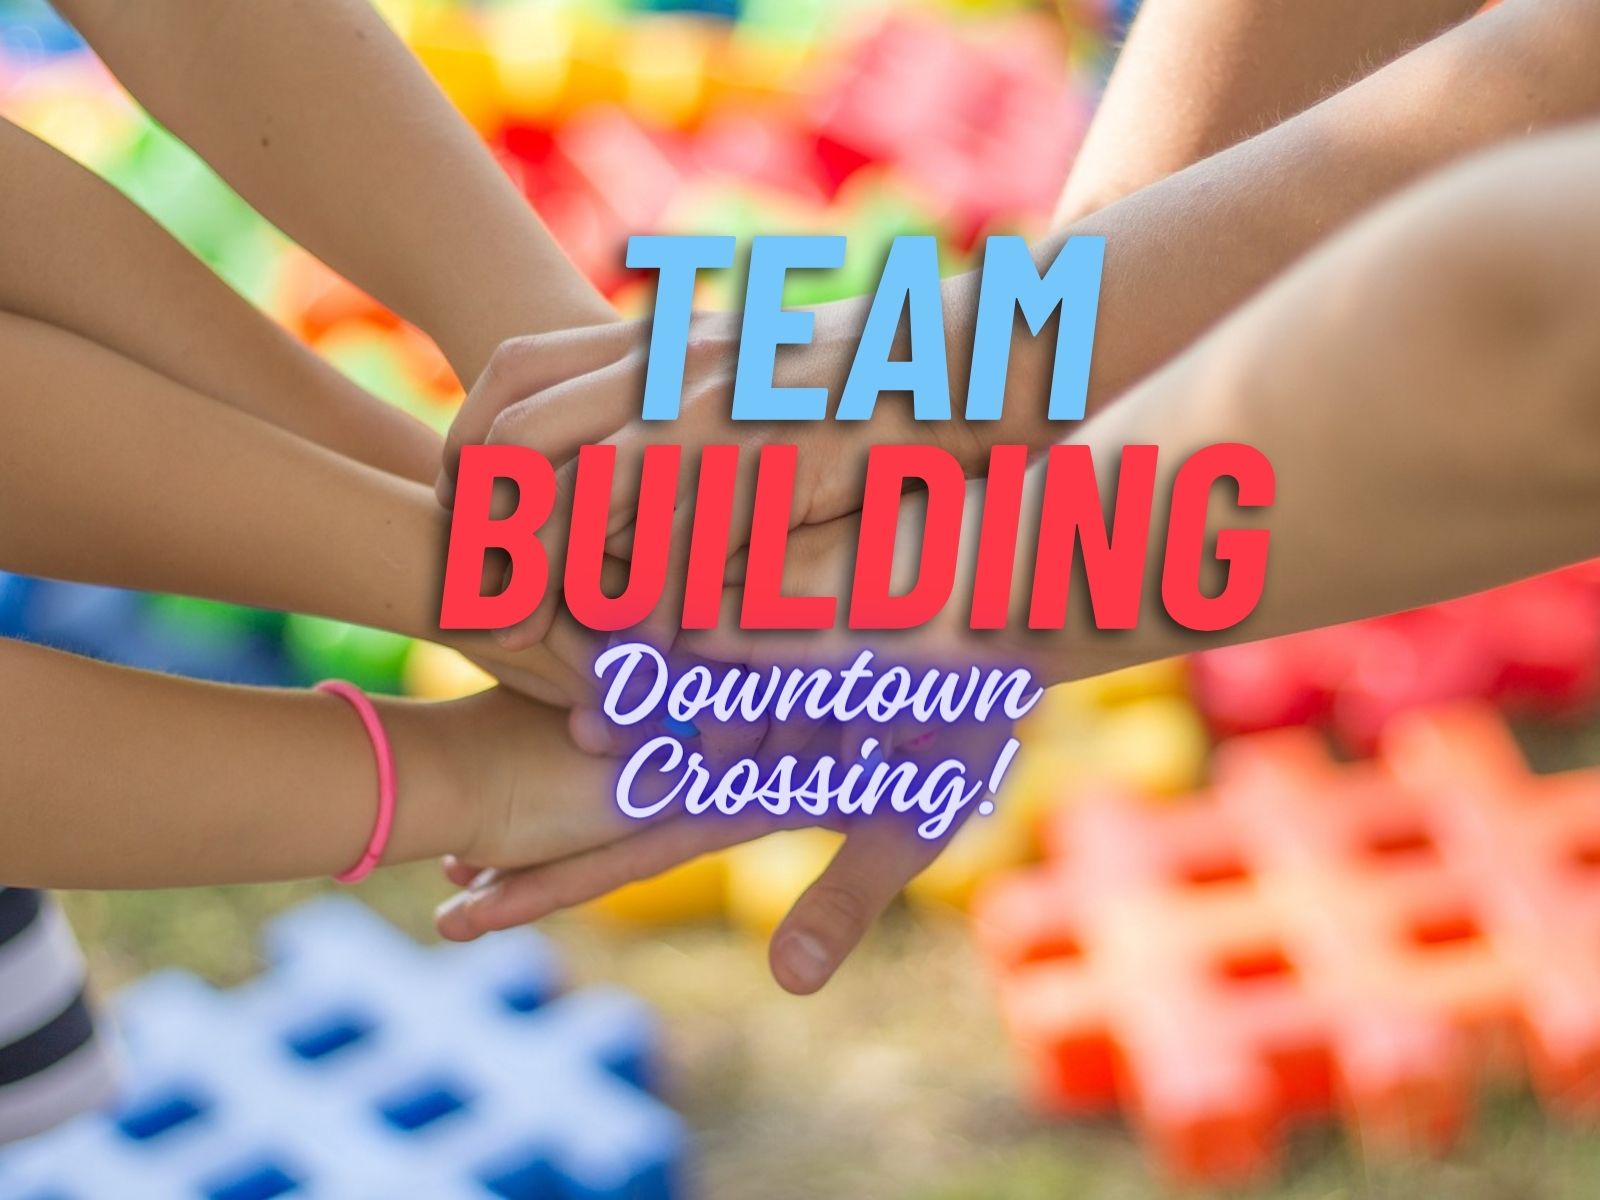 Team Building Event in Downtown Crossing, Massachusetts: Unleash Your Team’s Potential at Musicians Playground